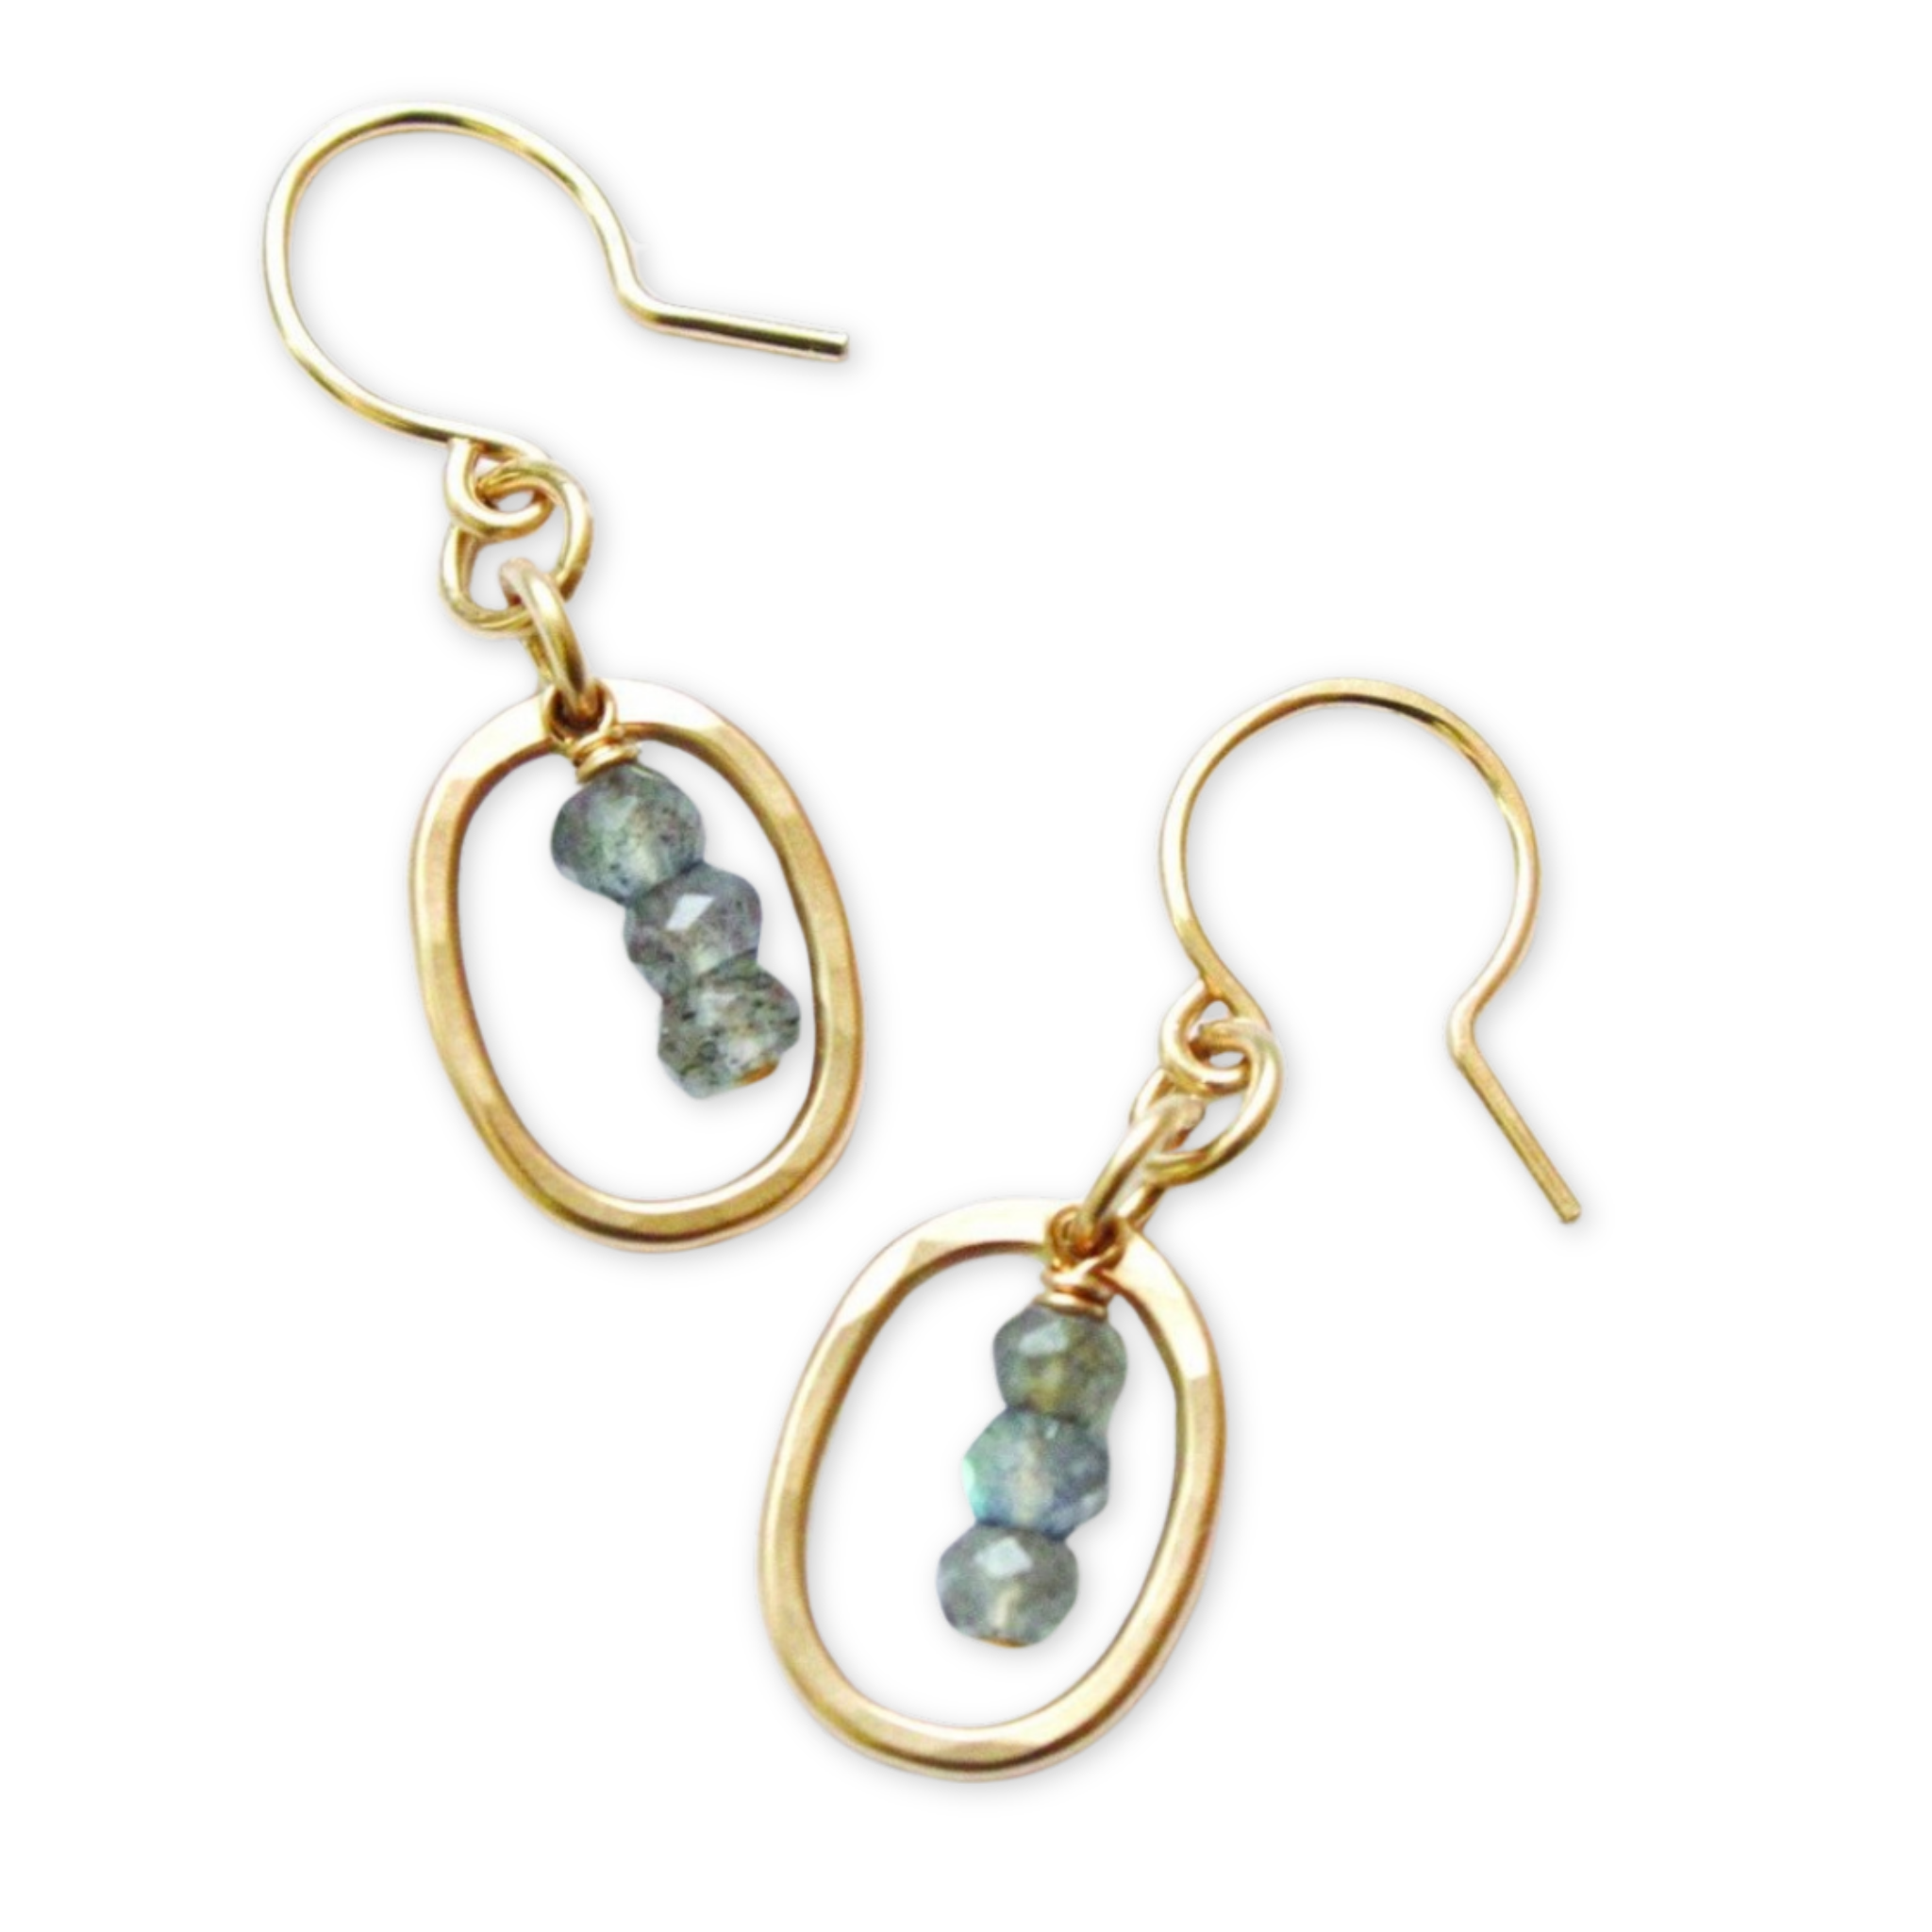 hammered oval earrings with three stones